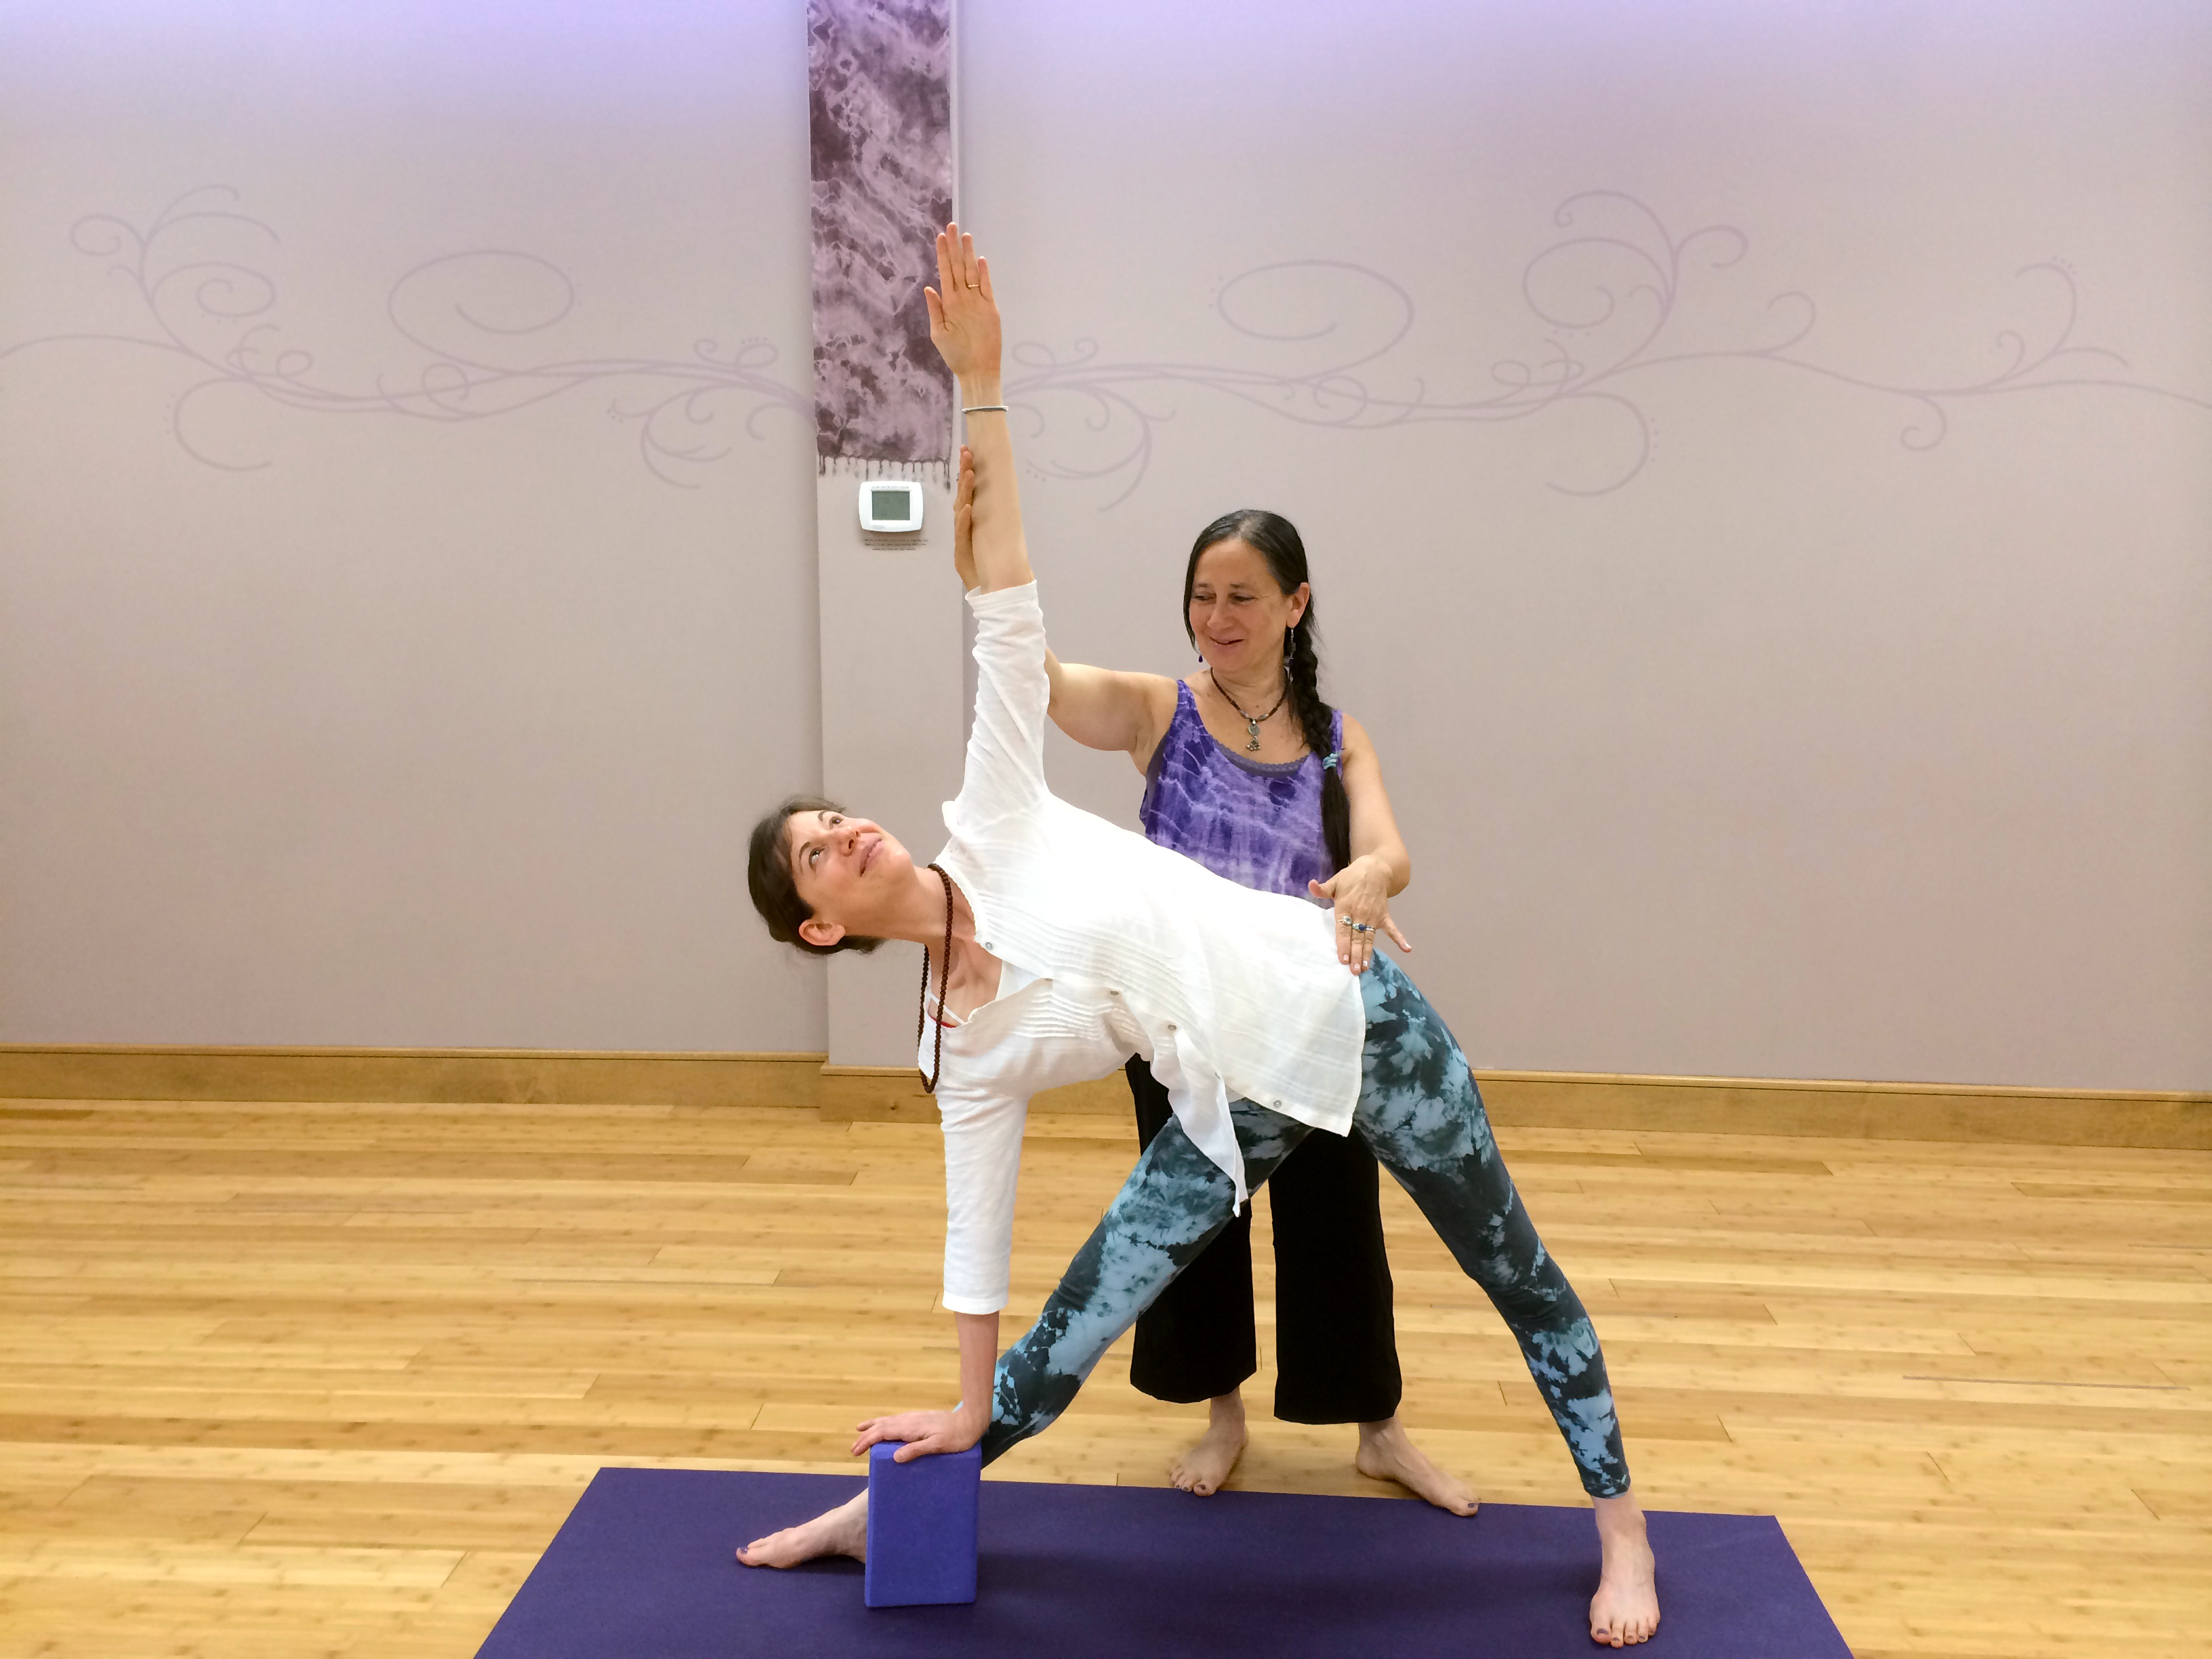 Affordable Yoga Bethesda - All Levels Welcome - Free Parking